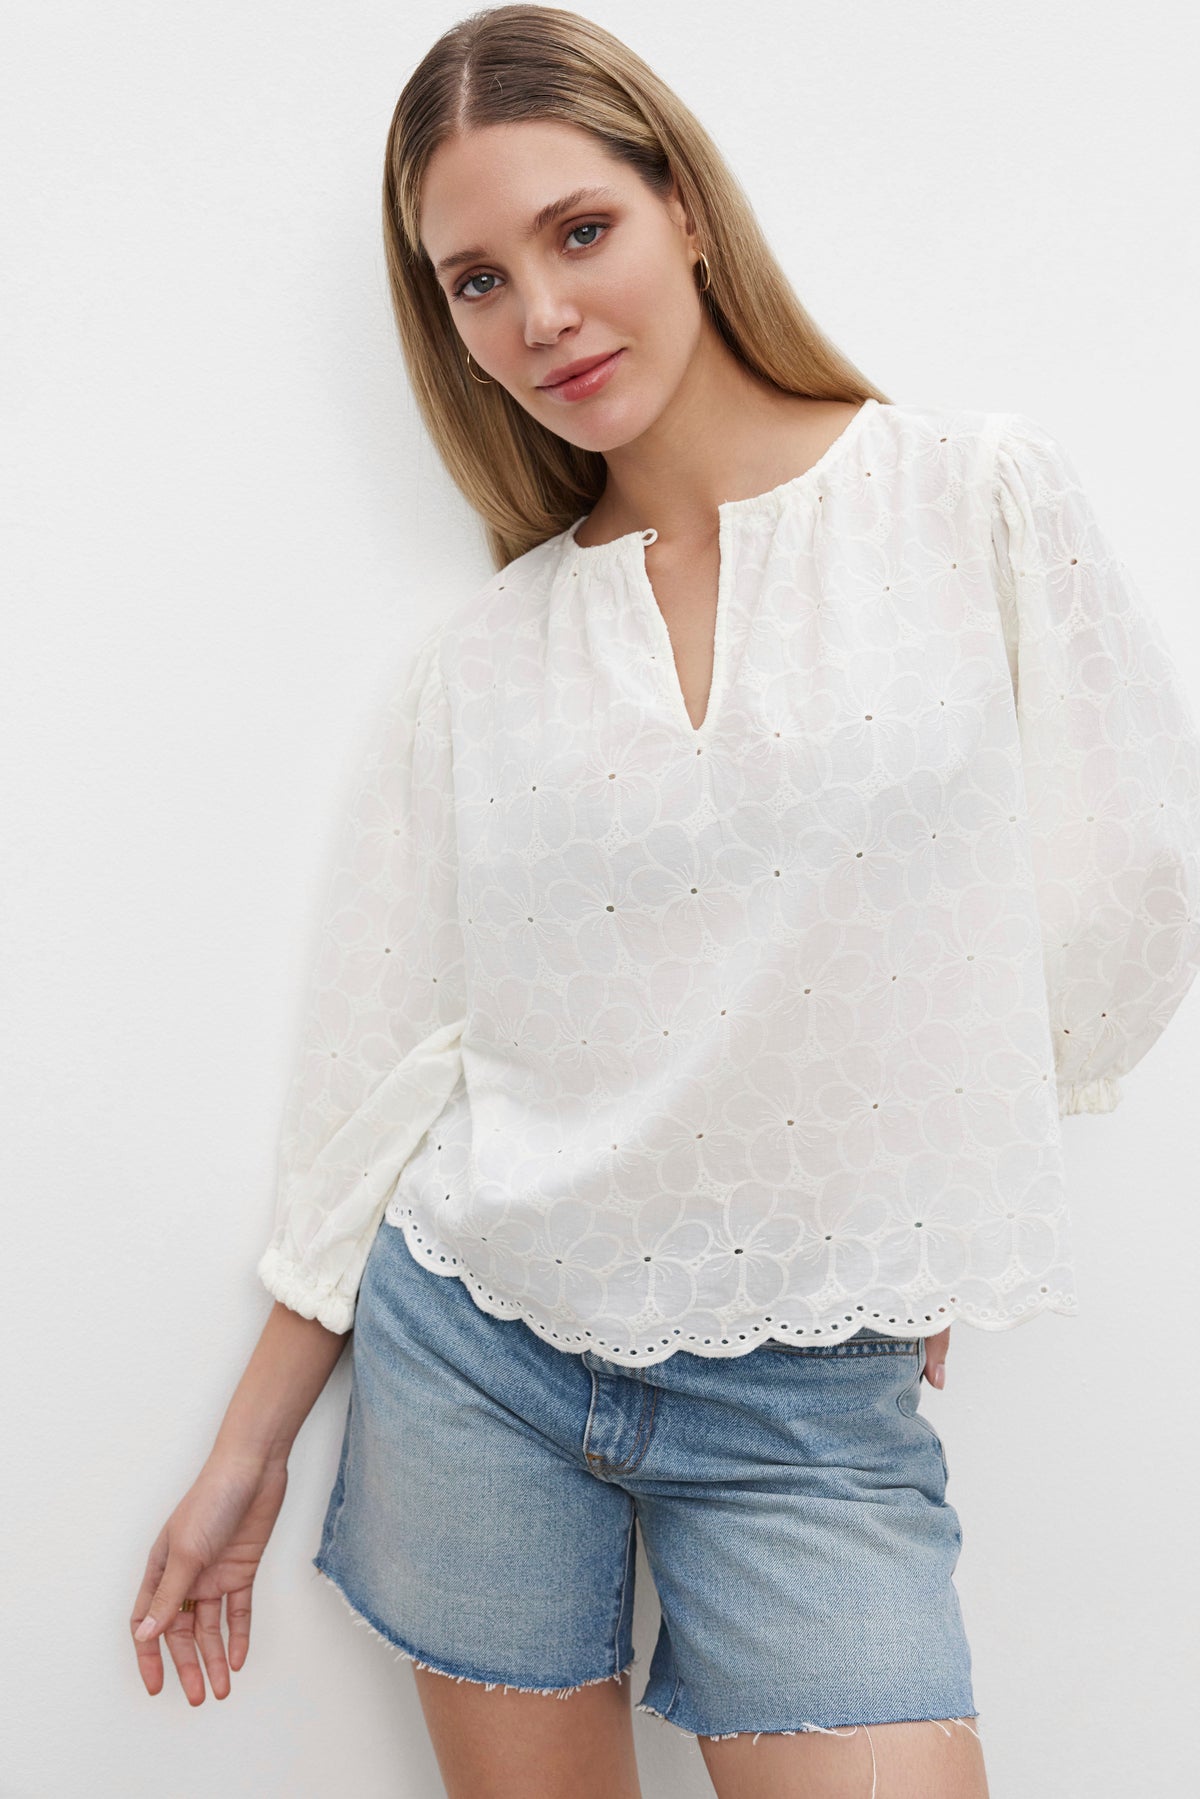   The model is wearing a CORINA EMBROIDERED COTTON TOP by Velvet by Graham & Spencer and denim shorts. 